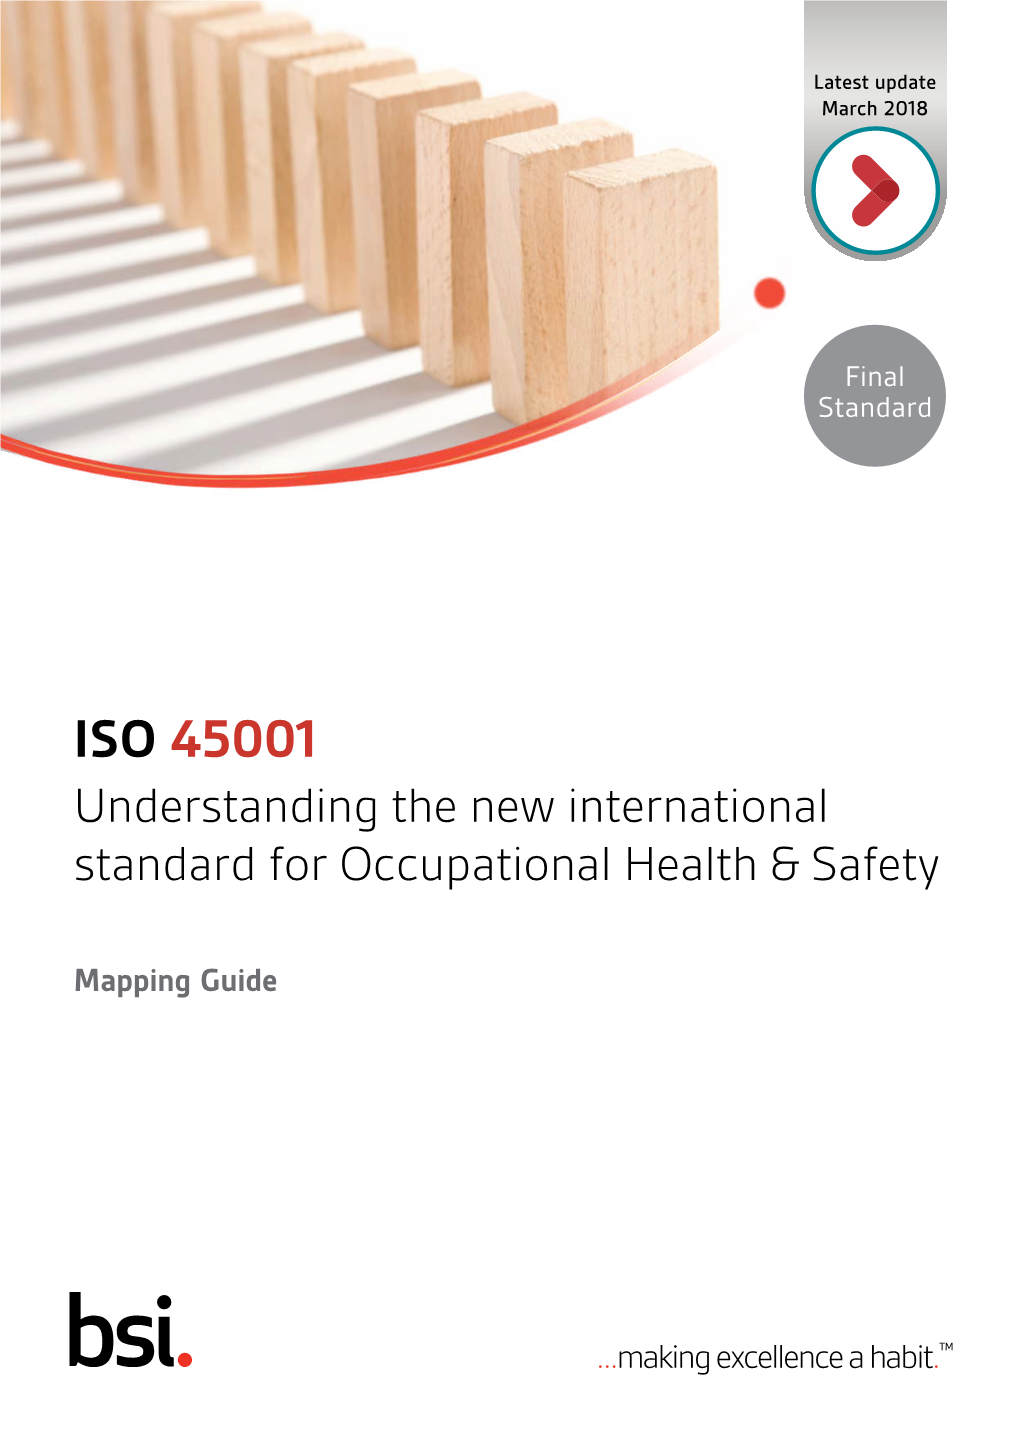 ISO 45001 Understanding the New International Standard for Occupational Health & Safety